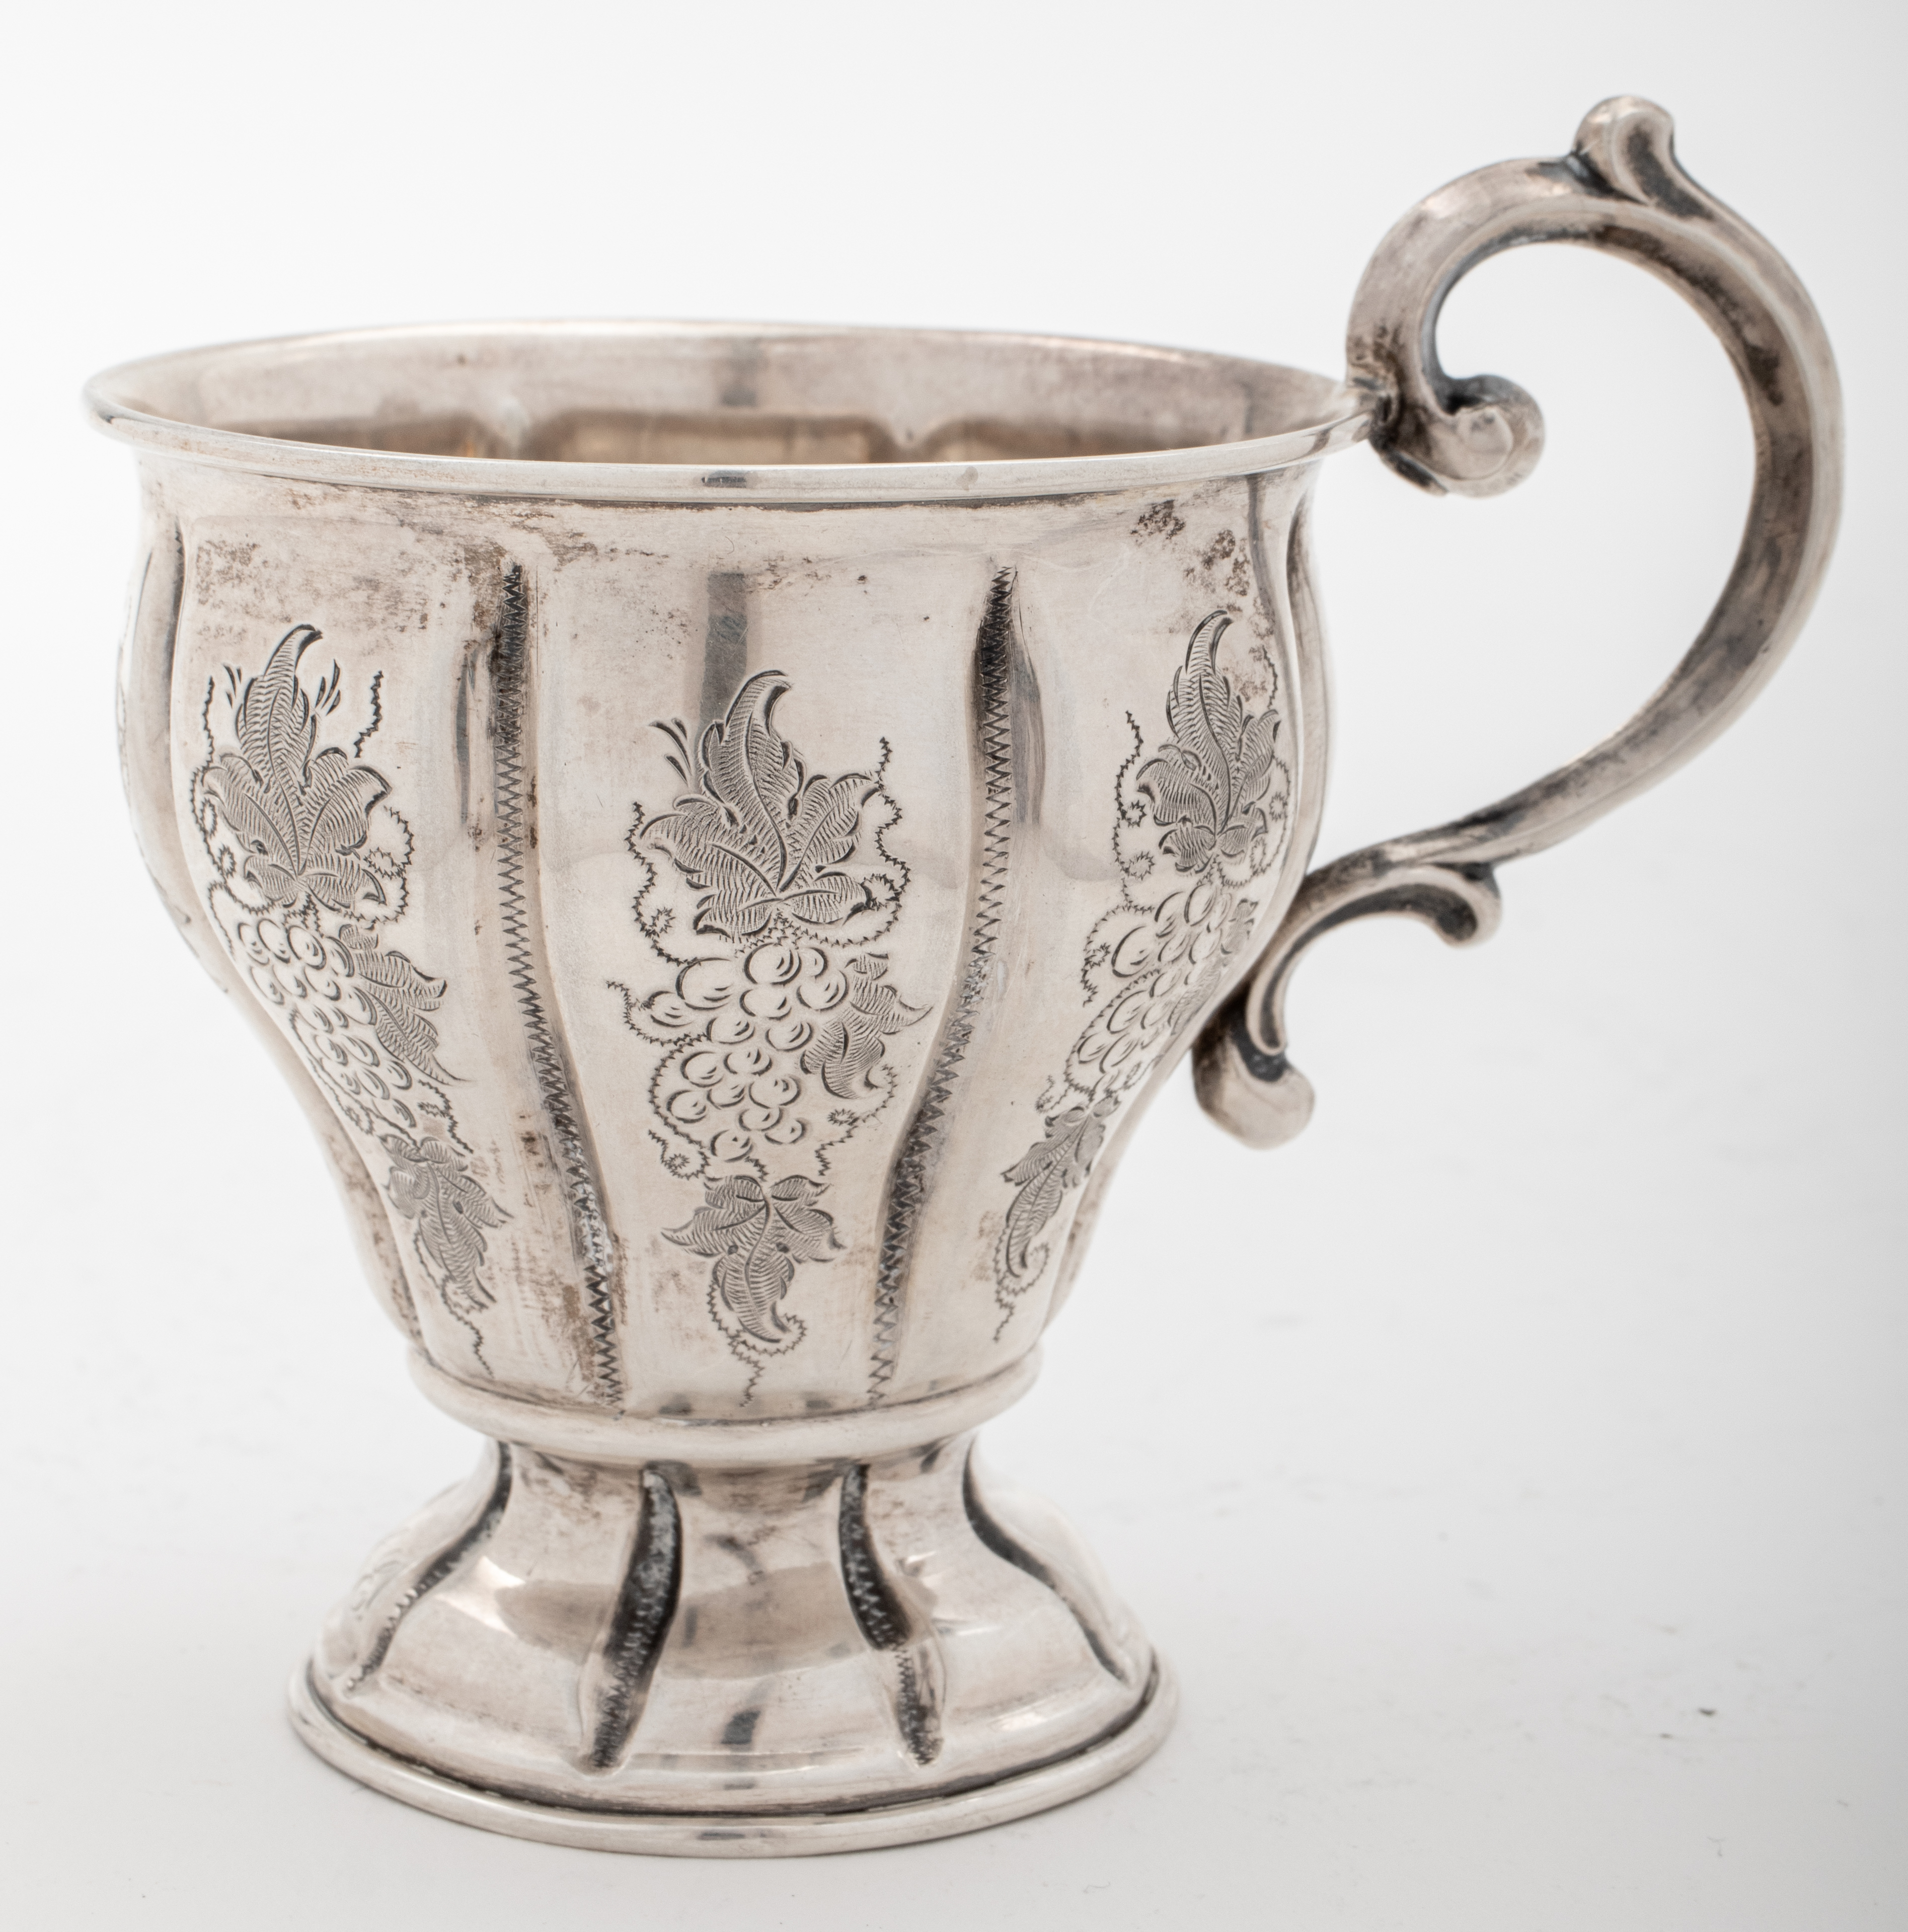 PERUVIAN ENGRAVED SILVER CUP, 19TH